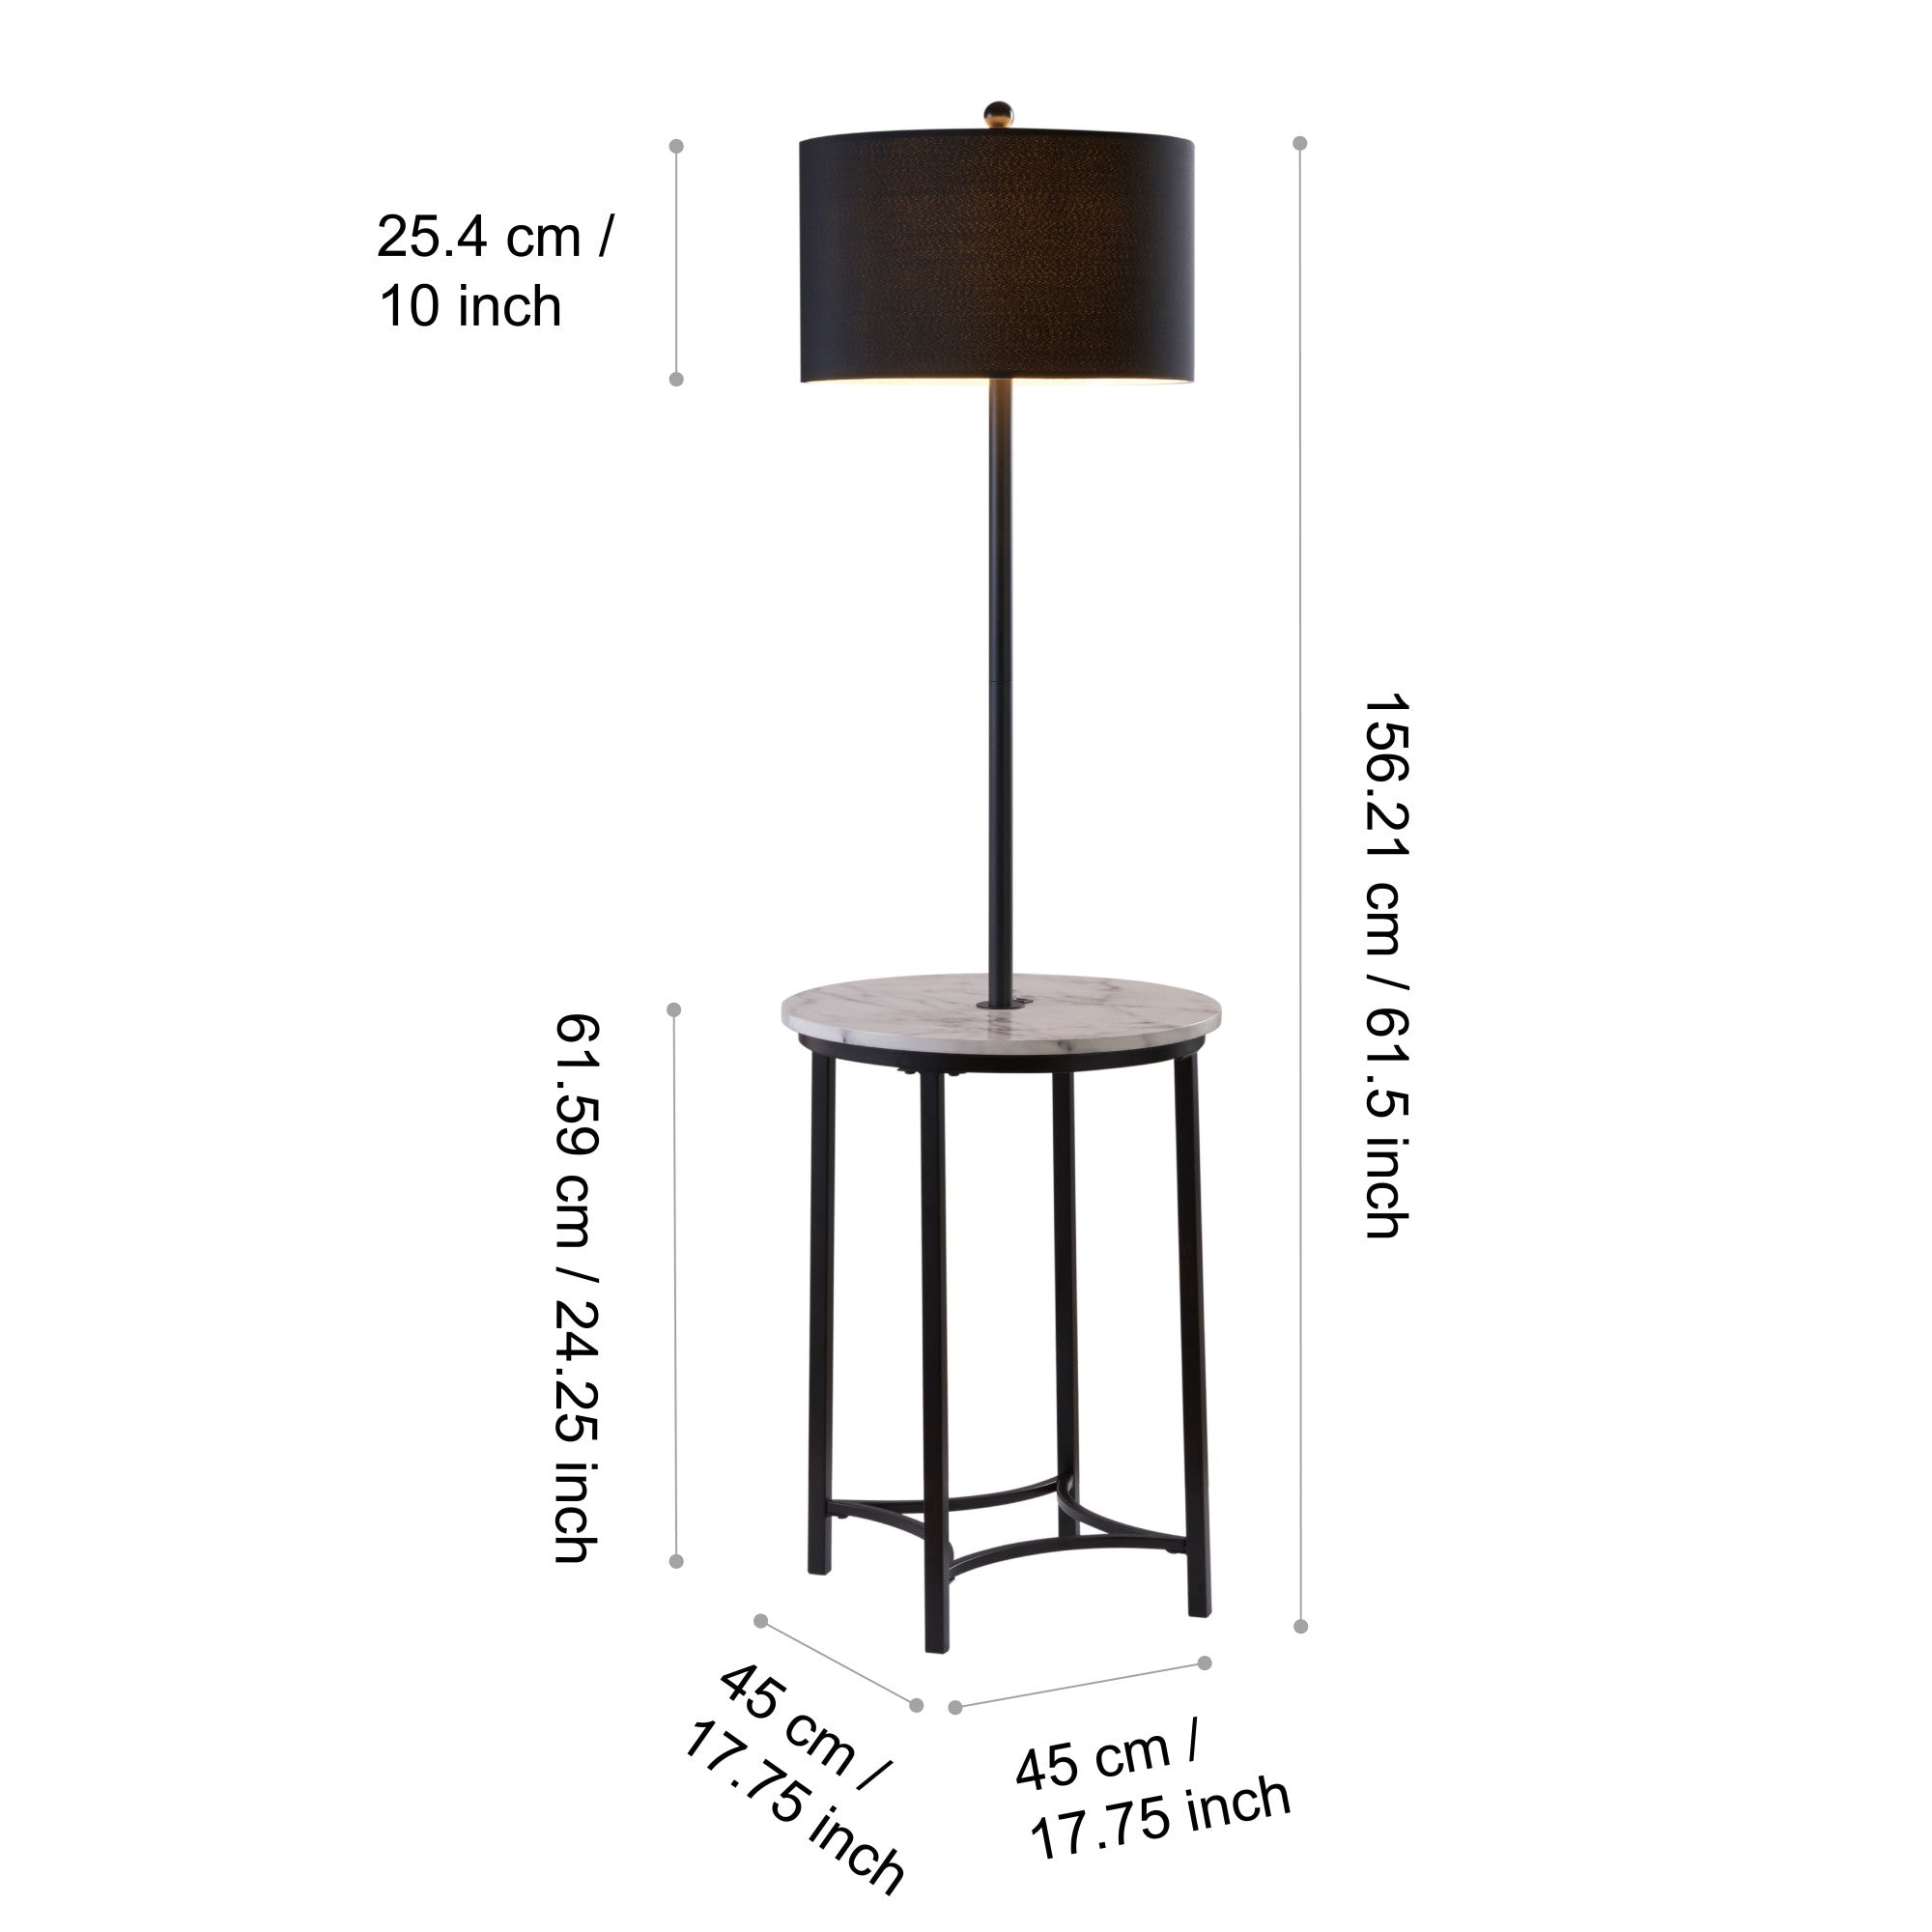 Teamson Home Shenna Floor Lamp with Faux Marble Tray Table and Built-In USB Port, Black